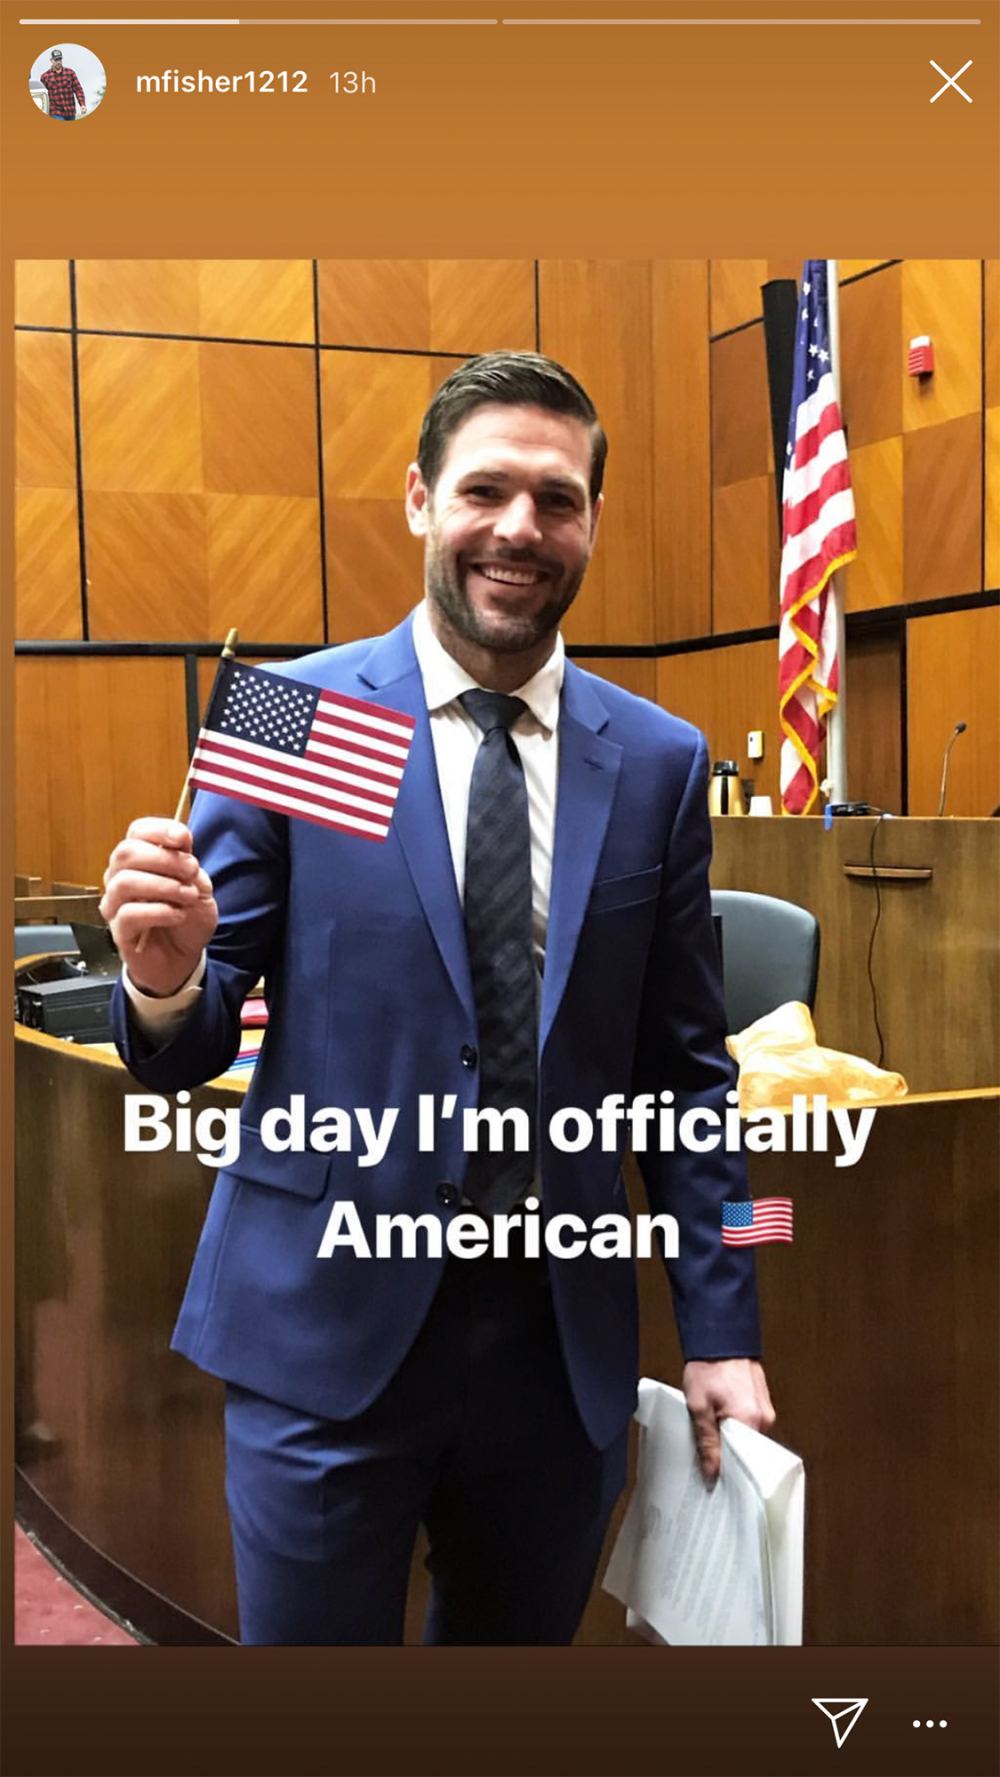 Carrie Underwood’s Husband Mike Fisher Becomes an American Citizen: ‘Big Day’